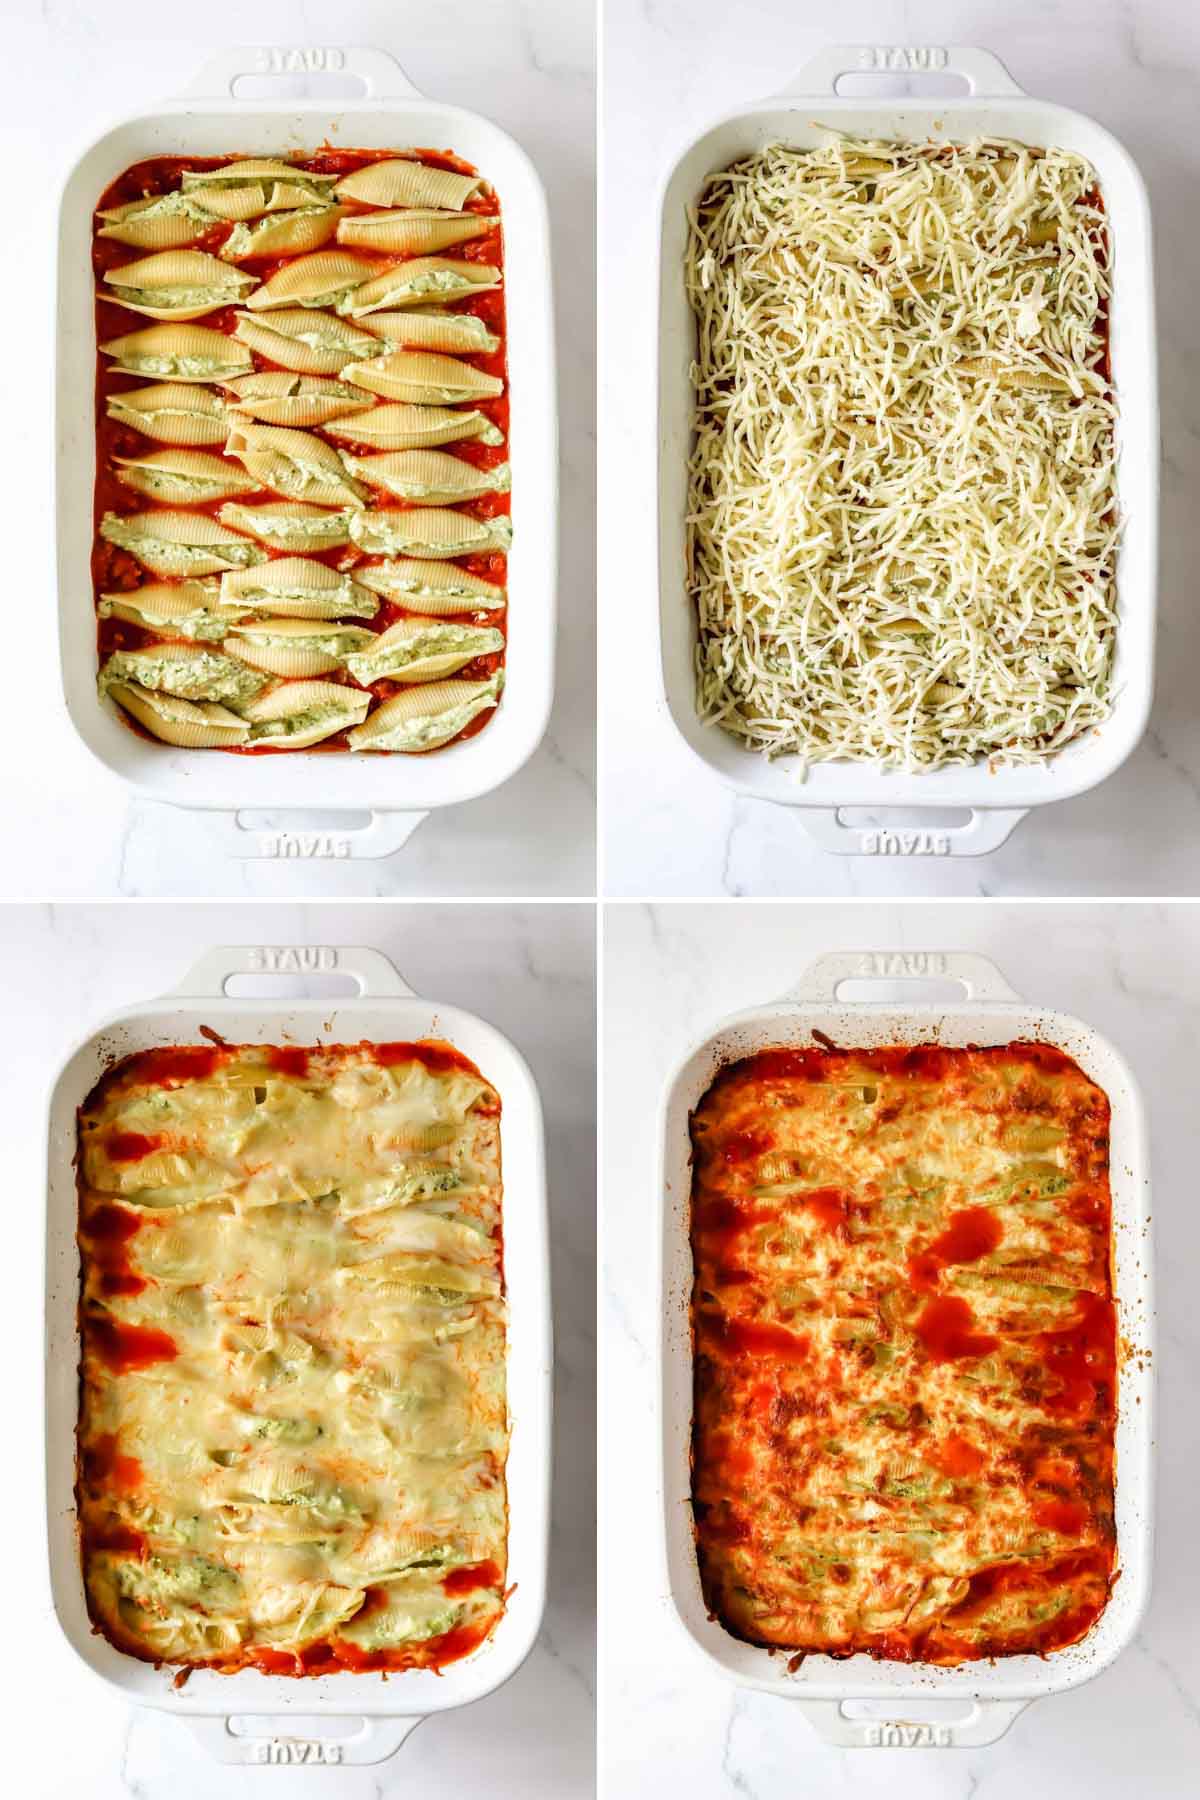 Four images showing the process of layering pesto ricotta stuffed pasta shells in a baking dish.